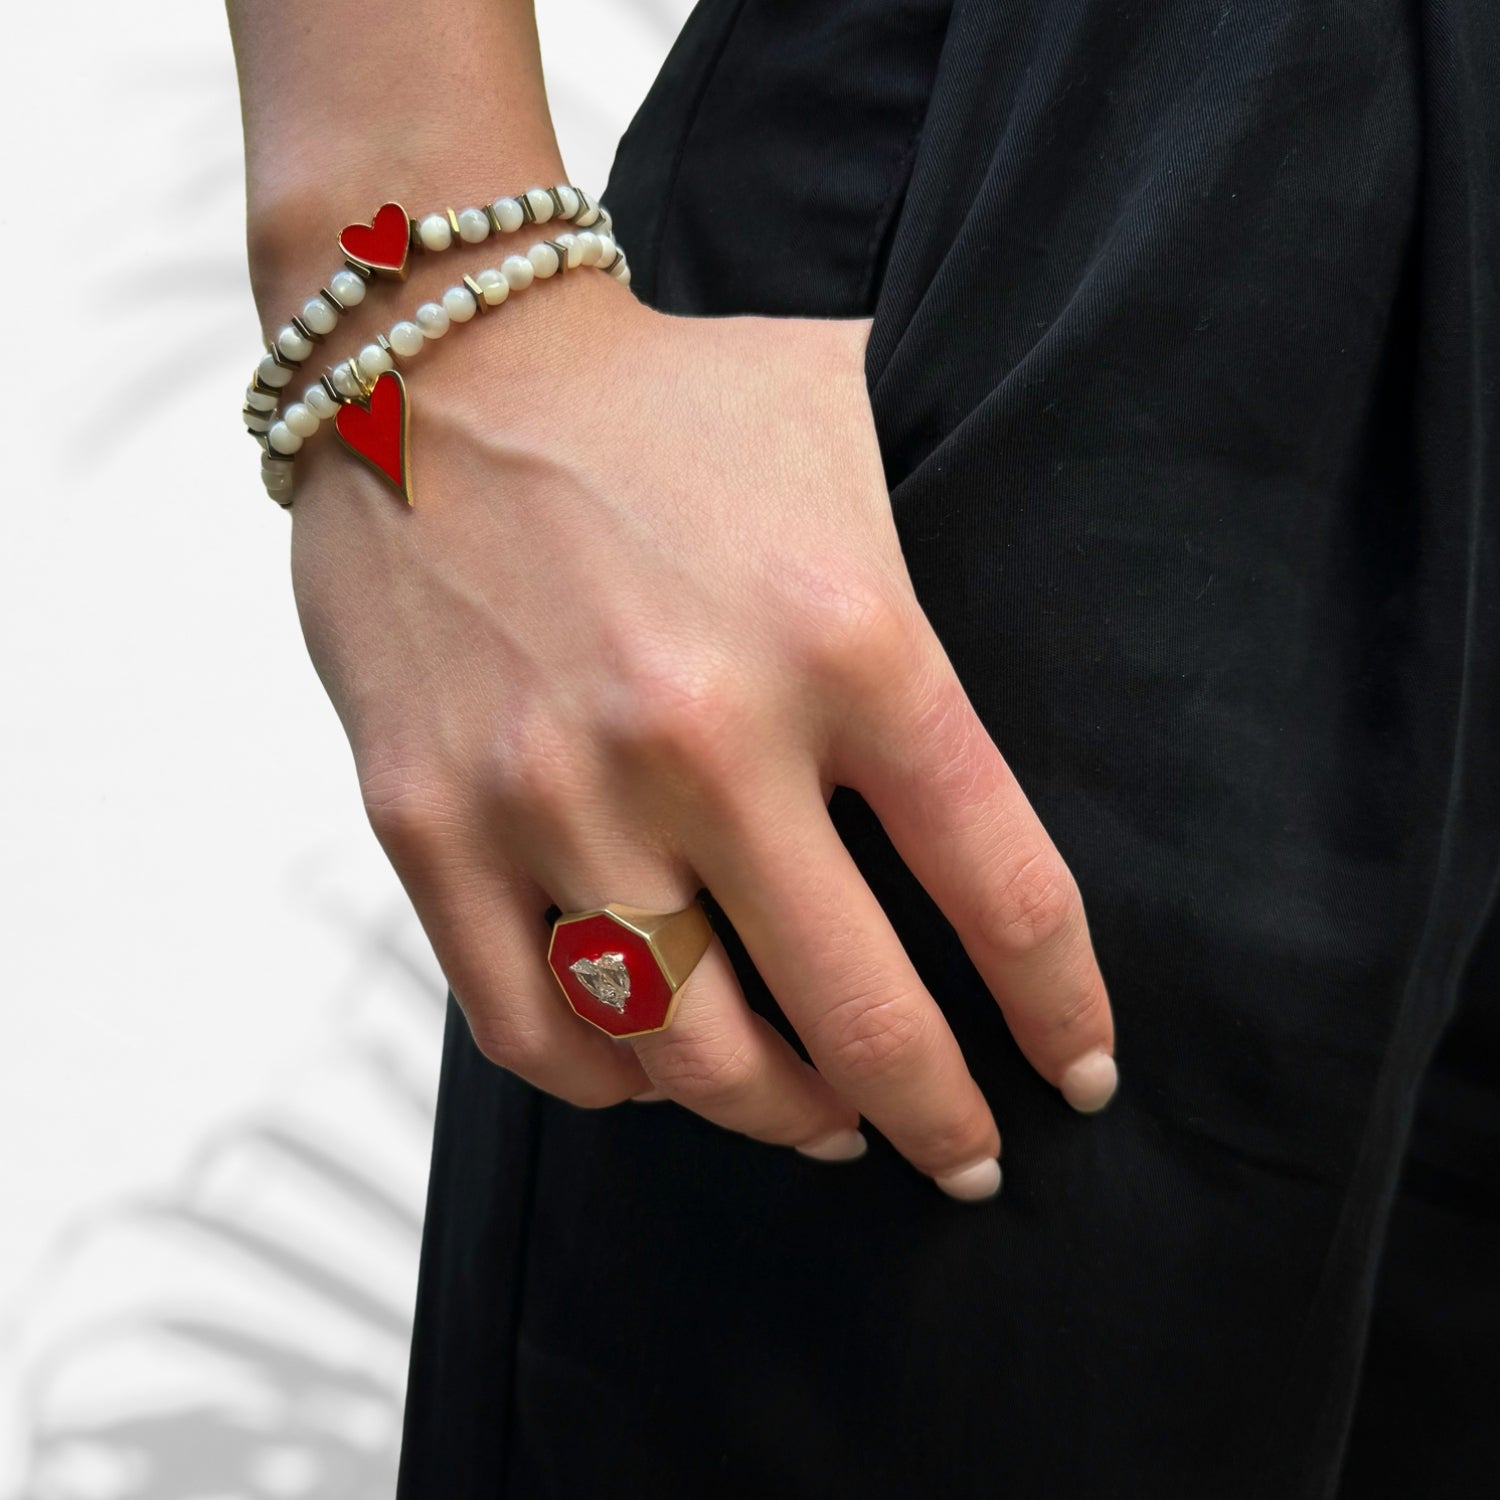 Passionate Affection: Model Wearing Valentine's Red Enamel Heart Gold Ring with Diamond